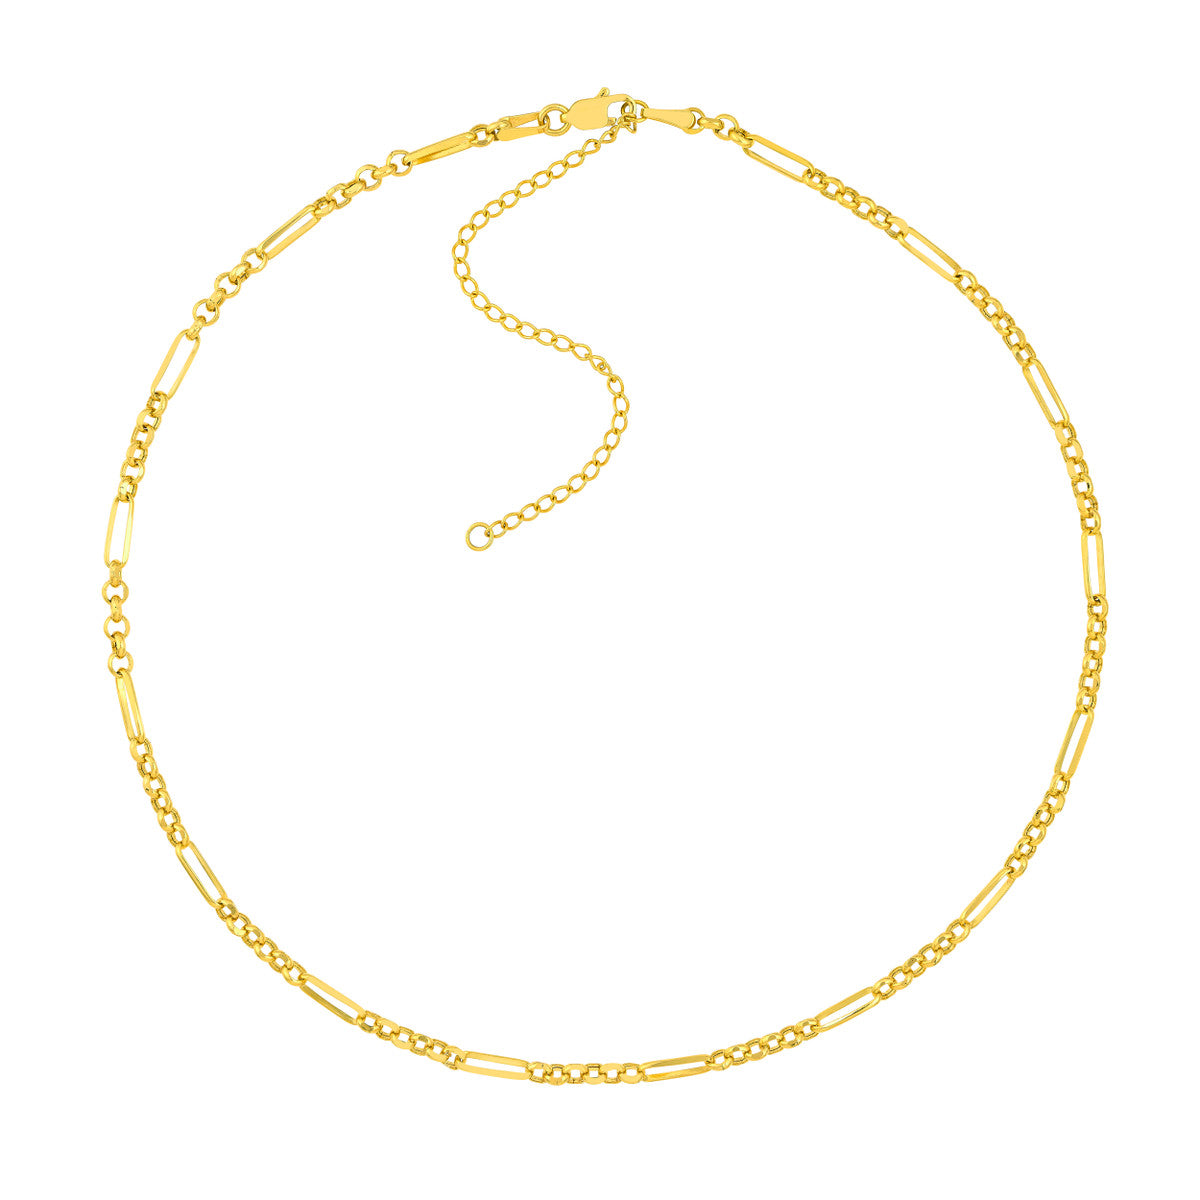 14K Gold 6+1 Rolo Paper Clip Adjustable Choker Chain Necklace with Lobster Lock